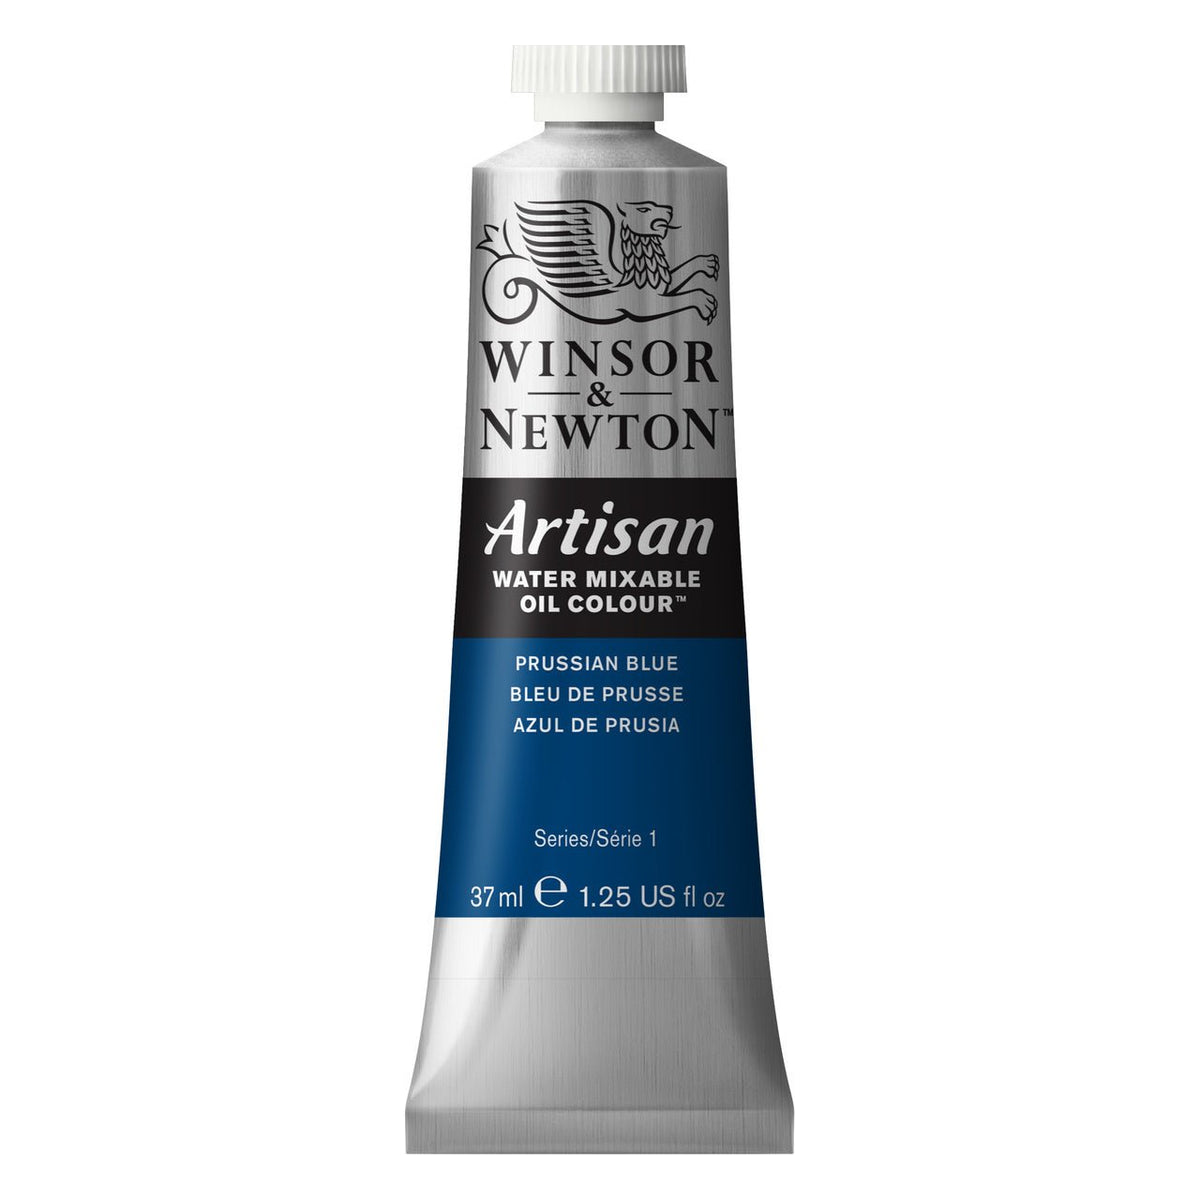 Winsor & Newton Artisan Water Mixable Oil 37ml - Prussian Blue - merriartist.com